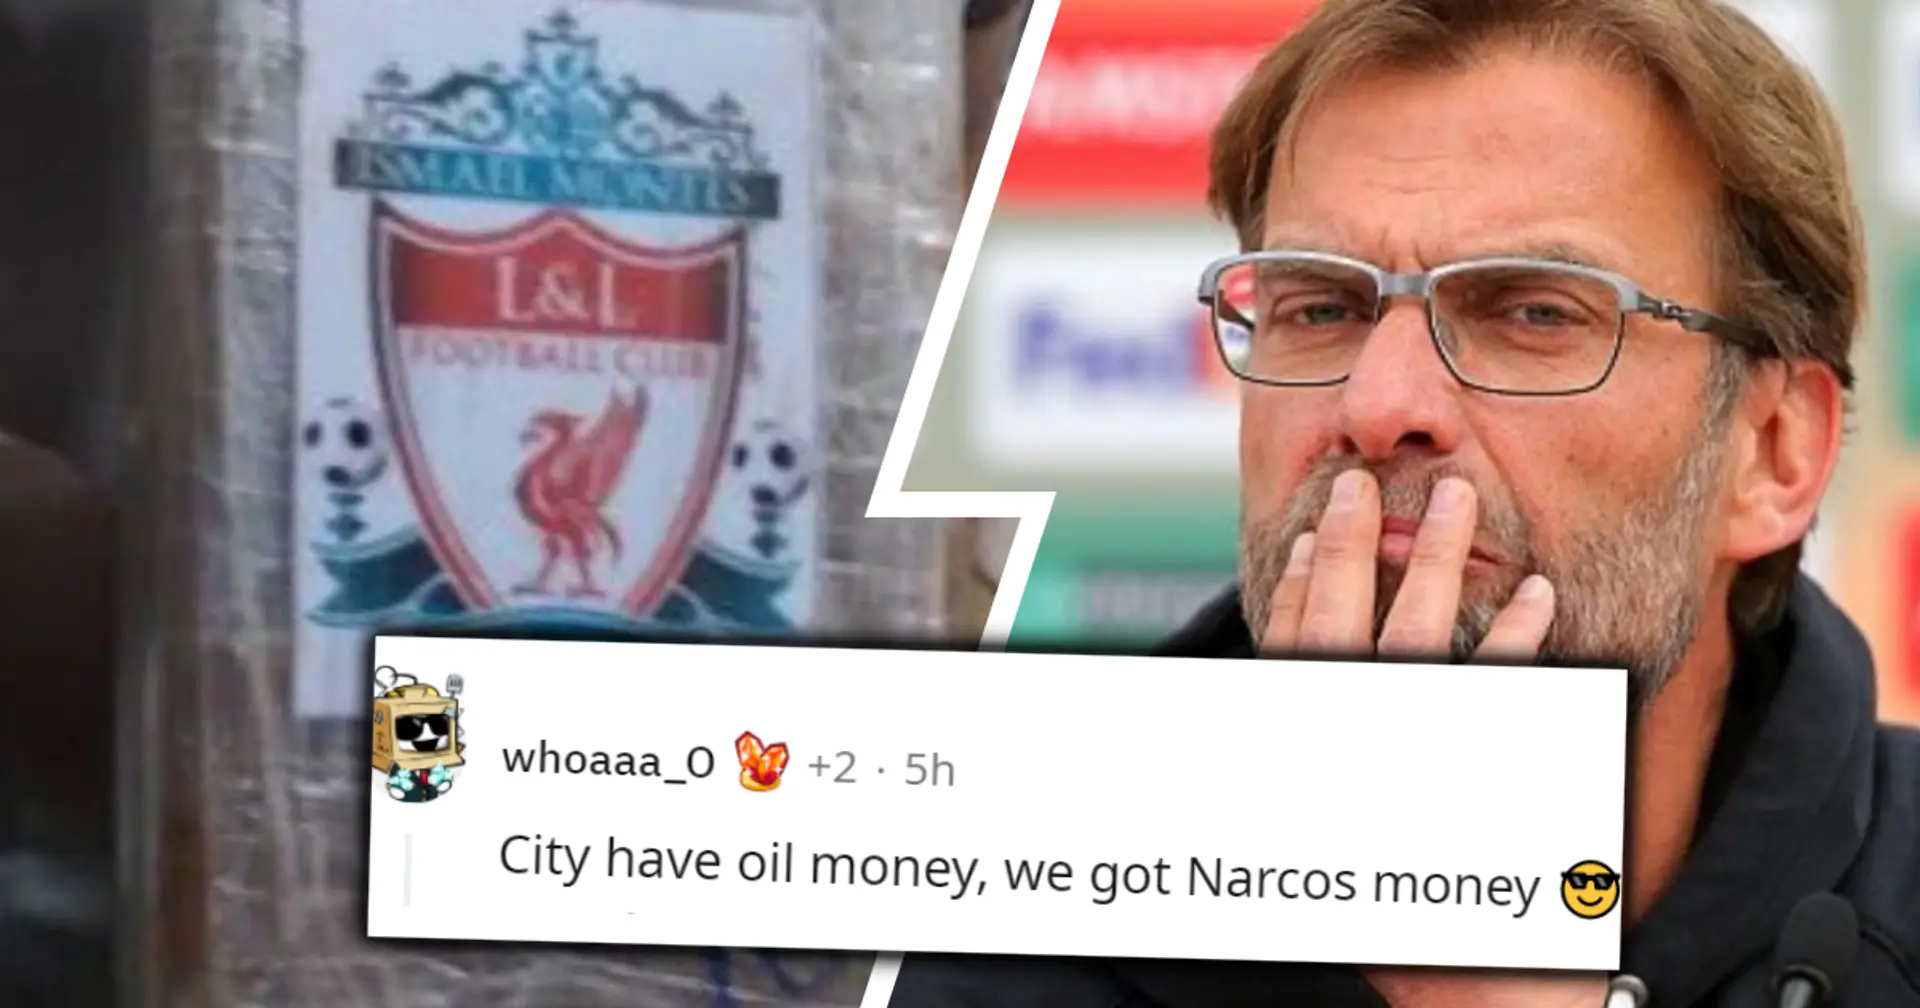 'New merch?', 'This is how we're financing Mbappe?': LFC fans react hilariously to Paraguay cocaine bust with club logo